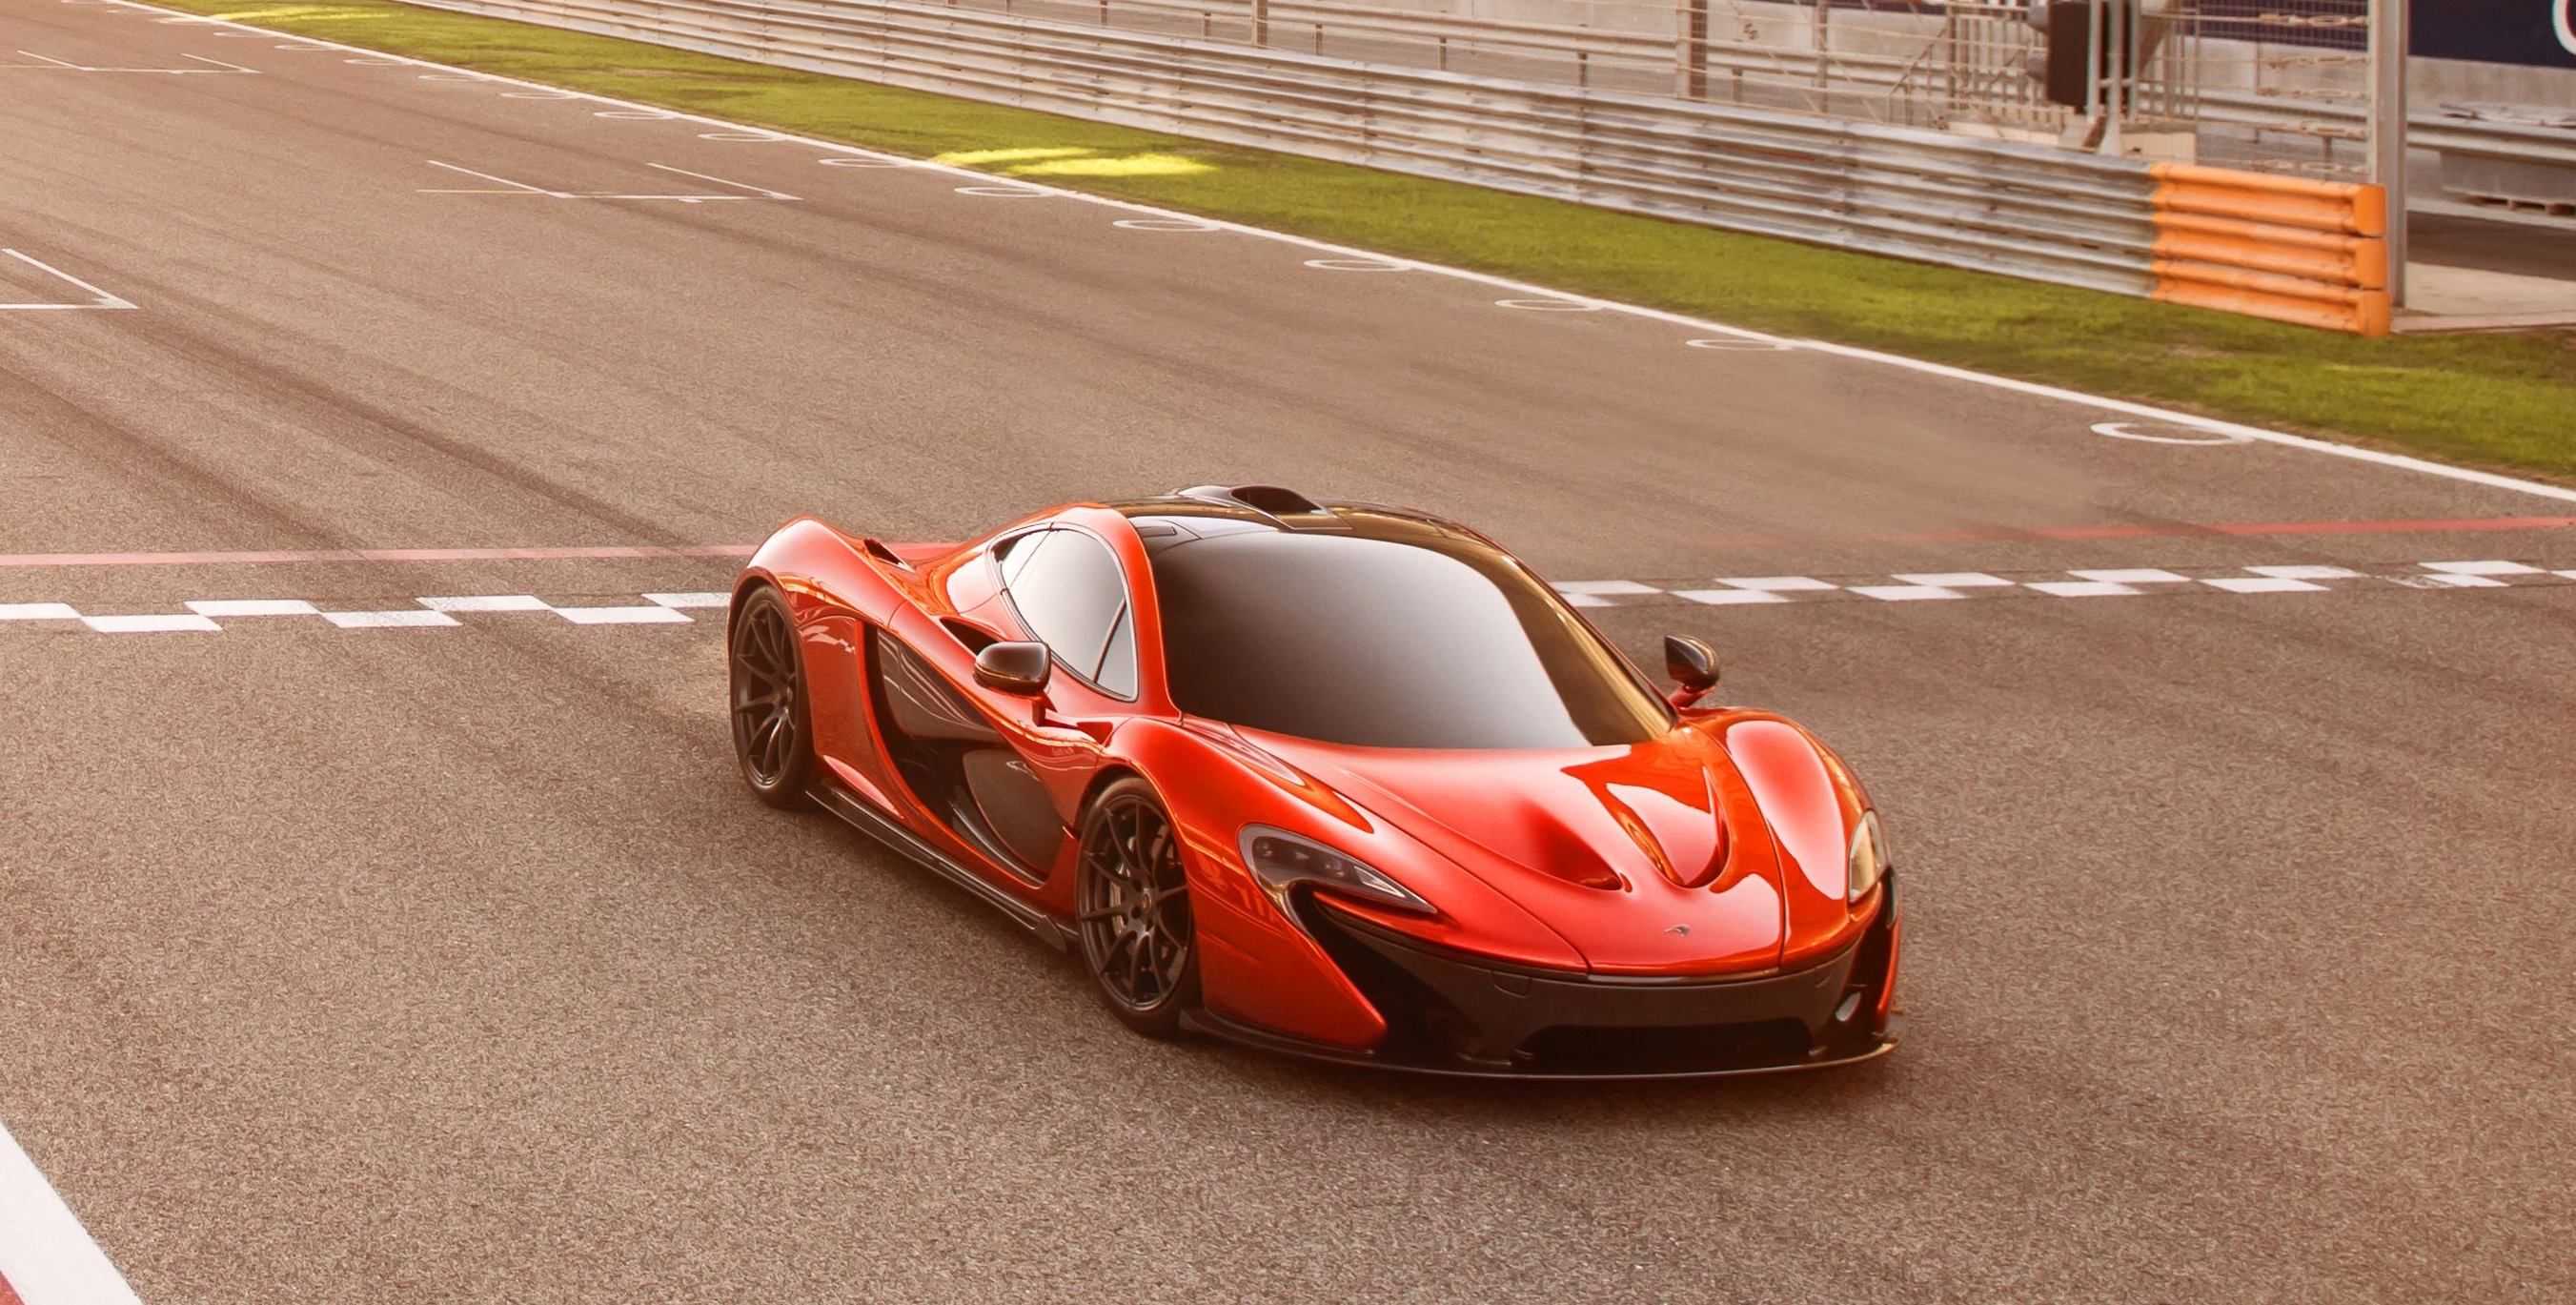 2020 A McLaren P1 Replacement Is Just Four Years Away